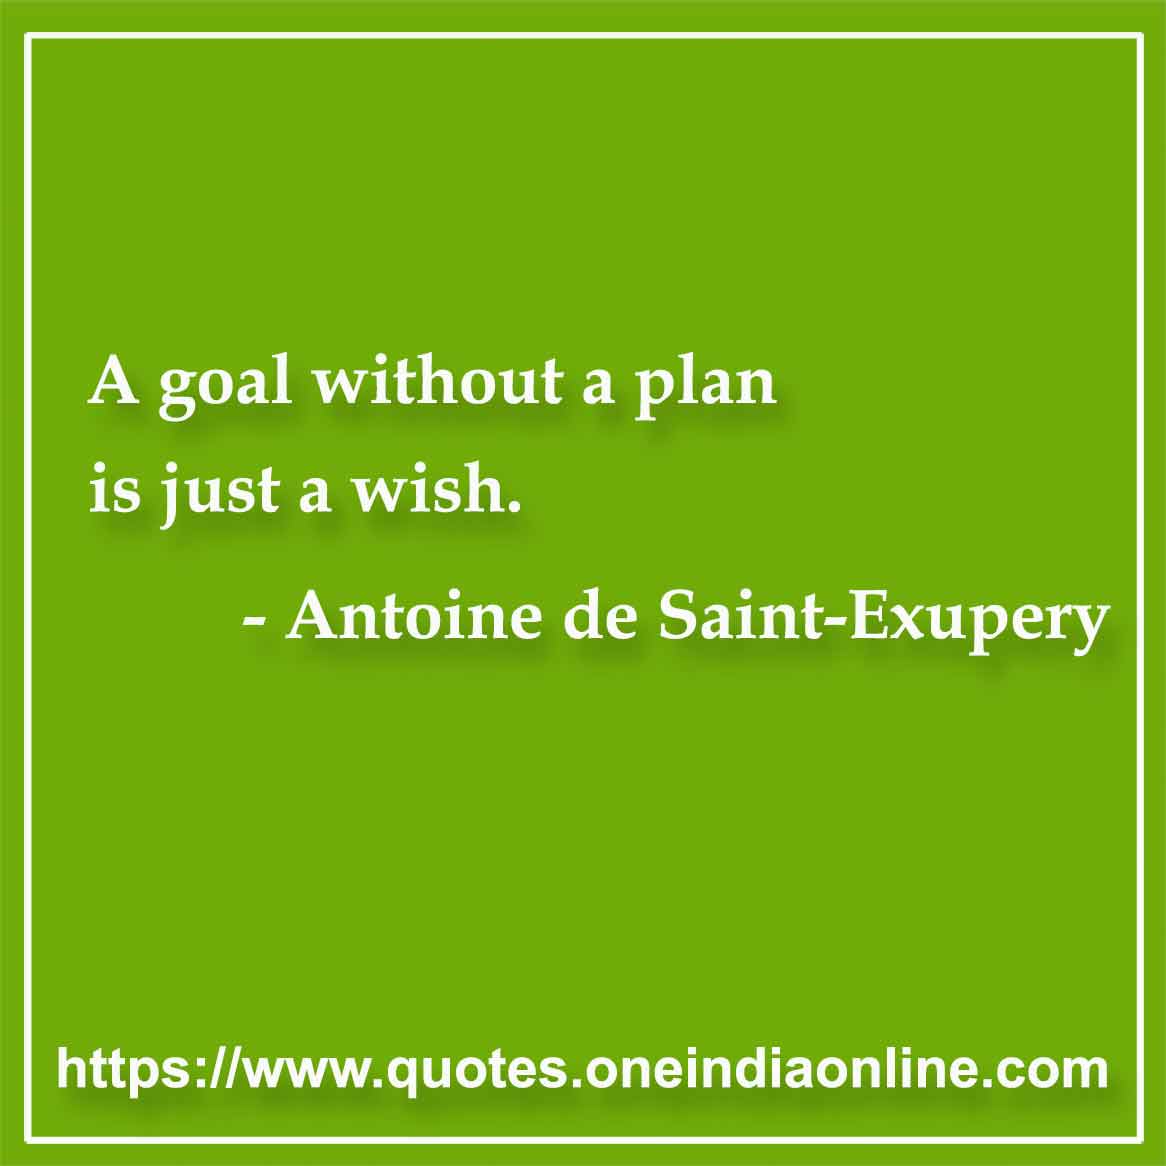 A goal without a plan is just a wish.

- Goals Quotes by Antoine de Saint-Exupery